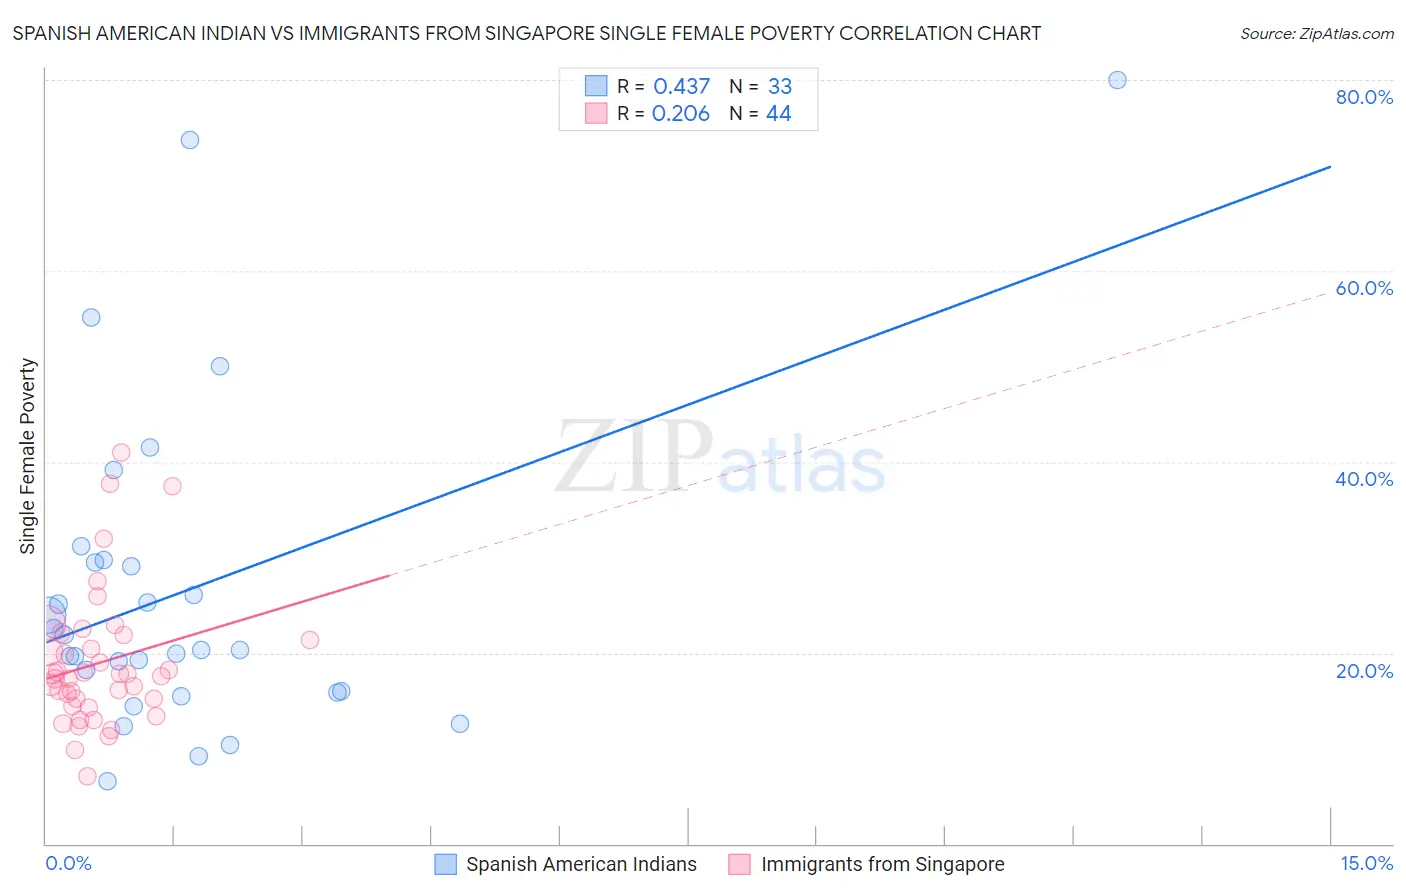 Spanish American Indian vs Immigrants from Singapore Single Female Poverty